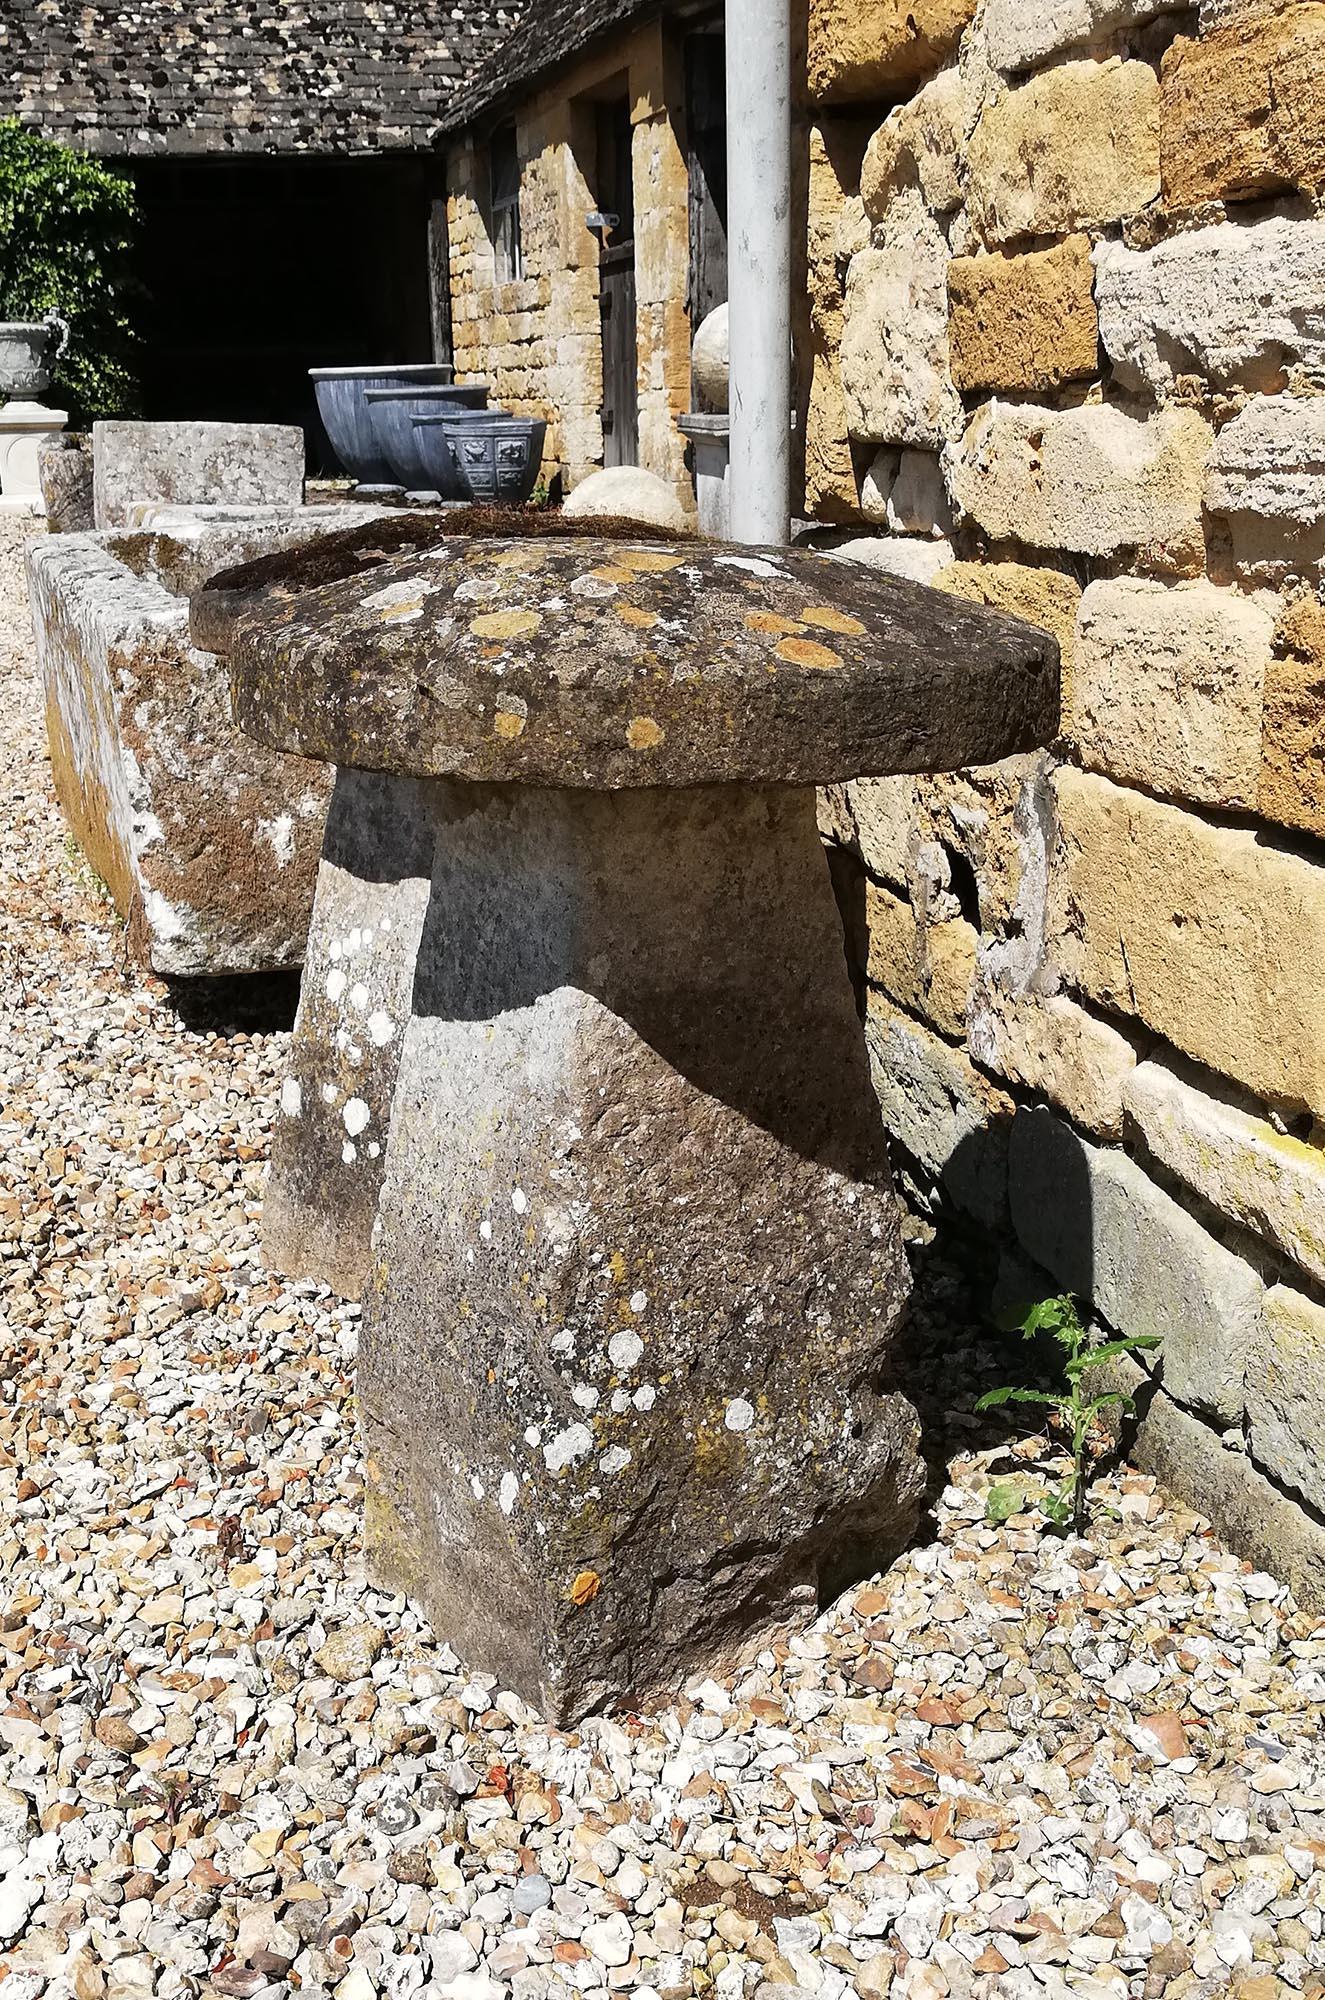 Defined as ‘a low mushroom shaped arrangement of a conical and flat circular stone used as a support for a haystack’, the staddle stone is asked about more than any other item we sell. 

Variously mis-described as a mushroom, a toadstool and